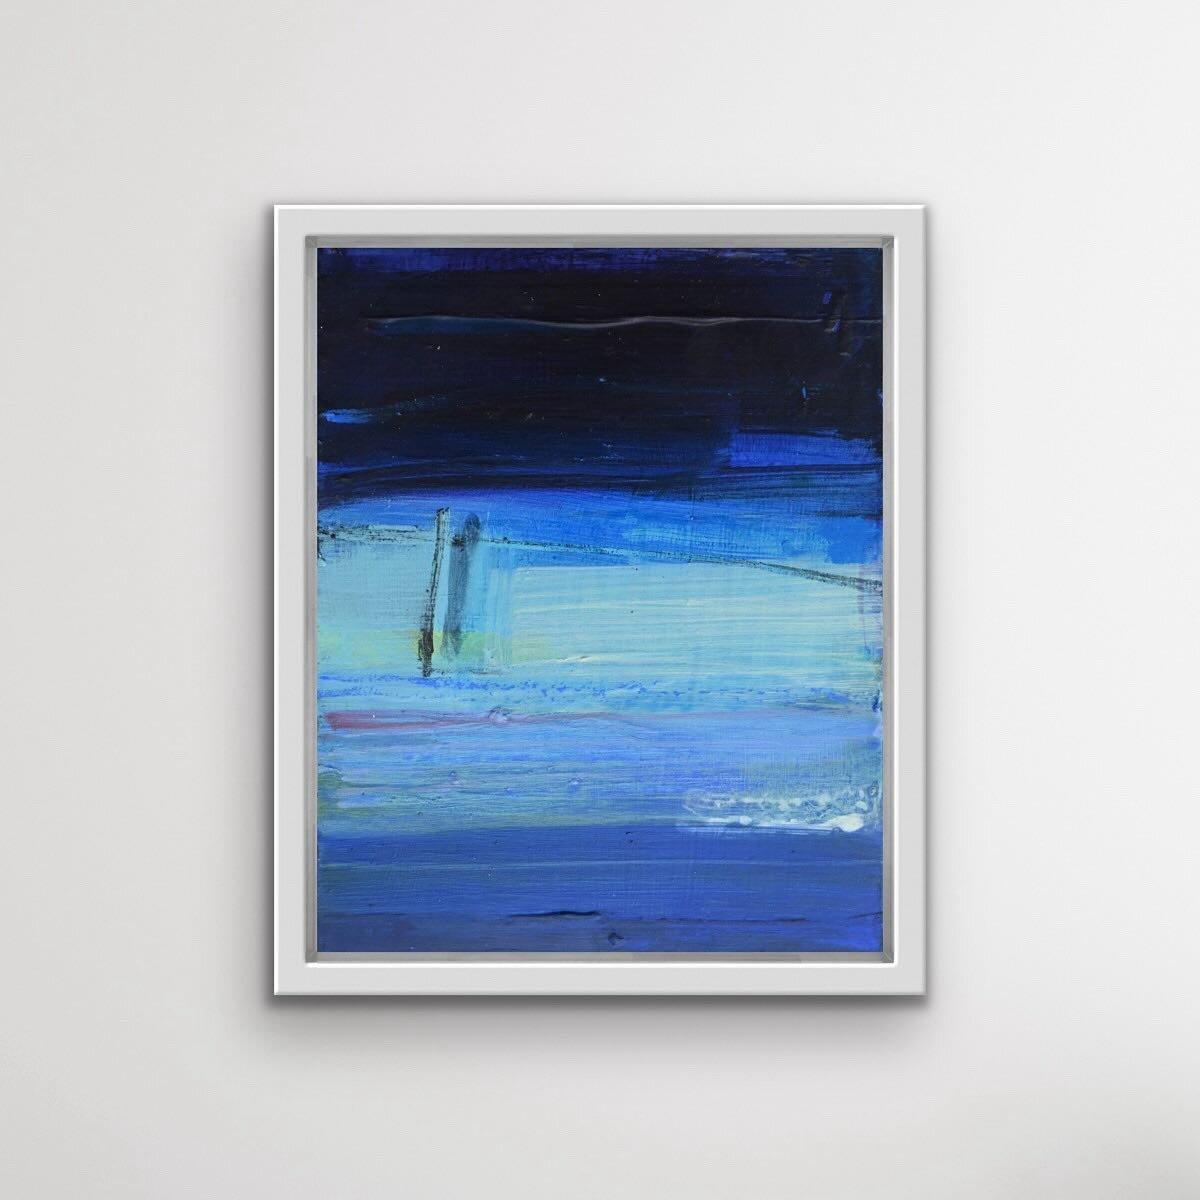 Sometimes, a small painting can be so effective to lift a corner of your home.

This expressive rich blue abstract, inspired by the sea in remote coastal locations &lsquo;Breathe&rsquo; will be exhibited as part of my upcoming available paintings wit